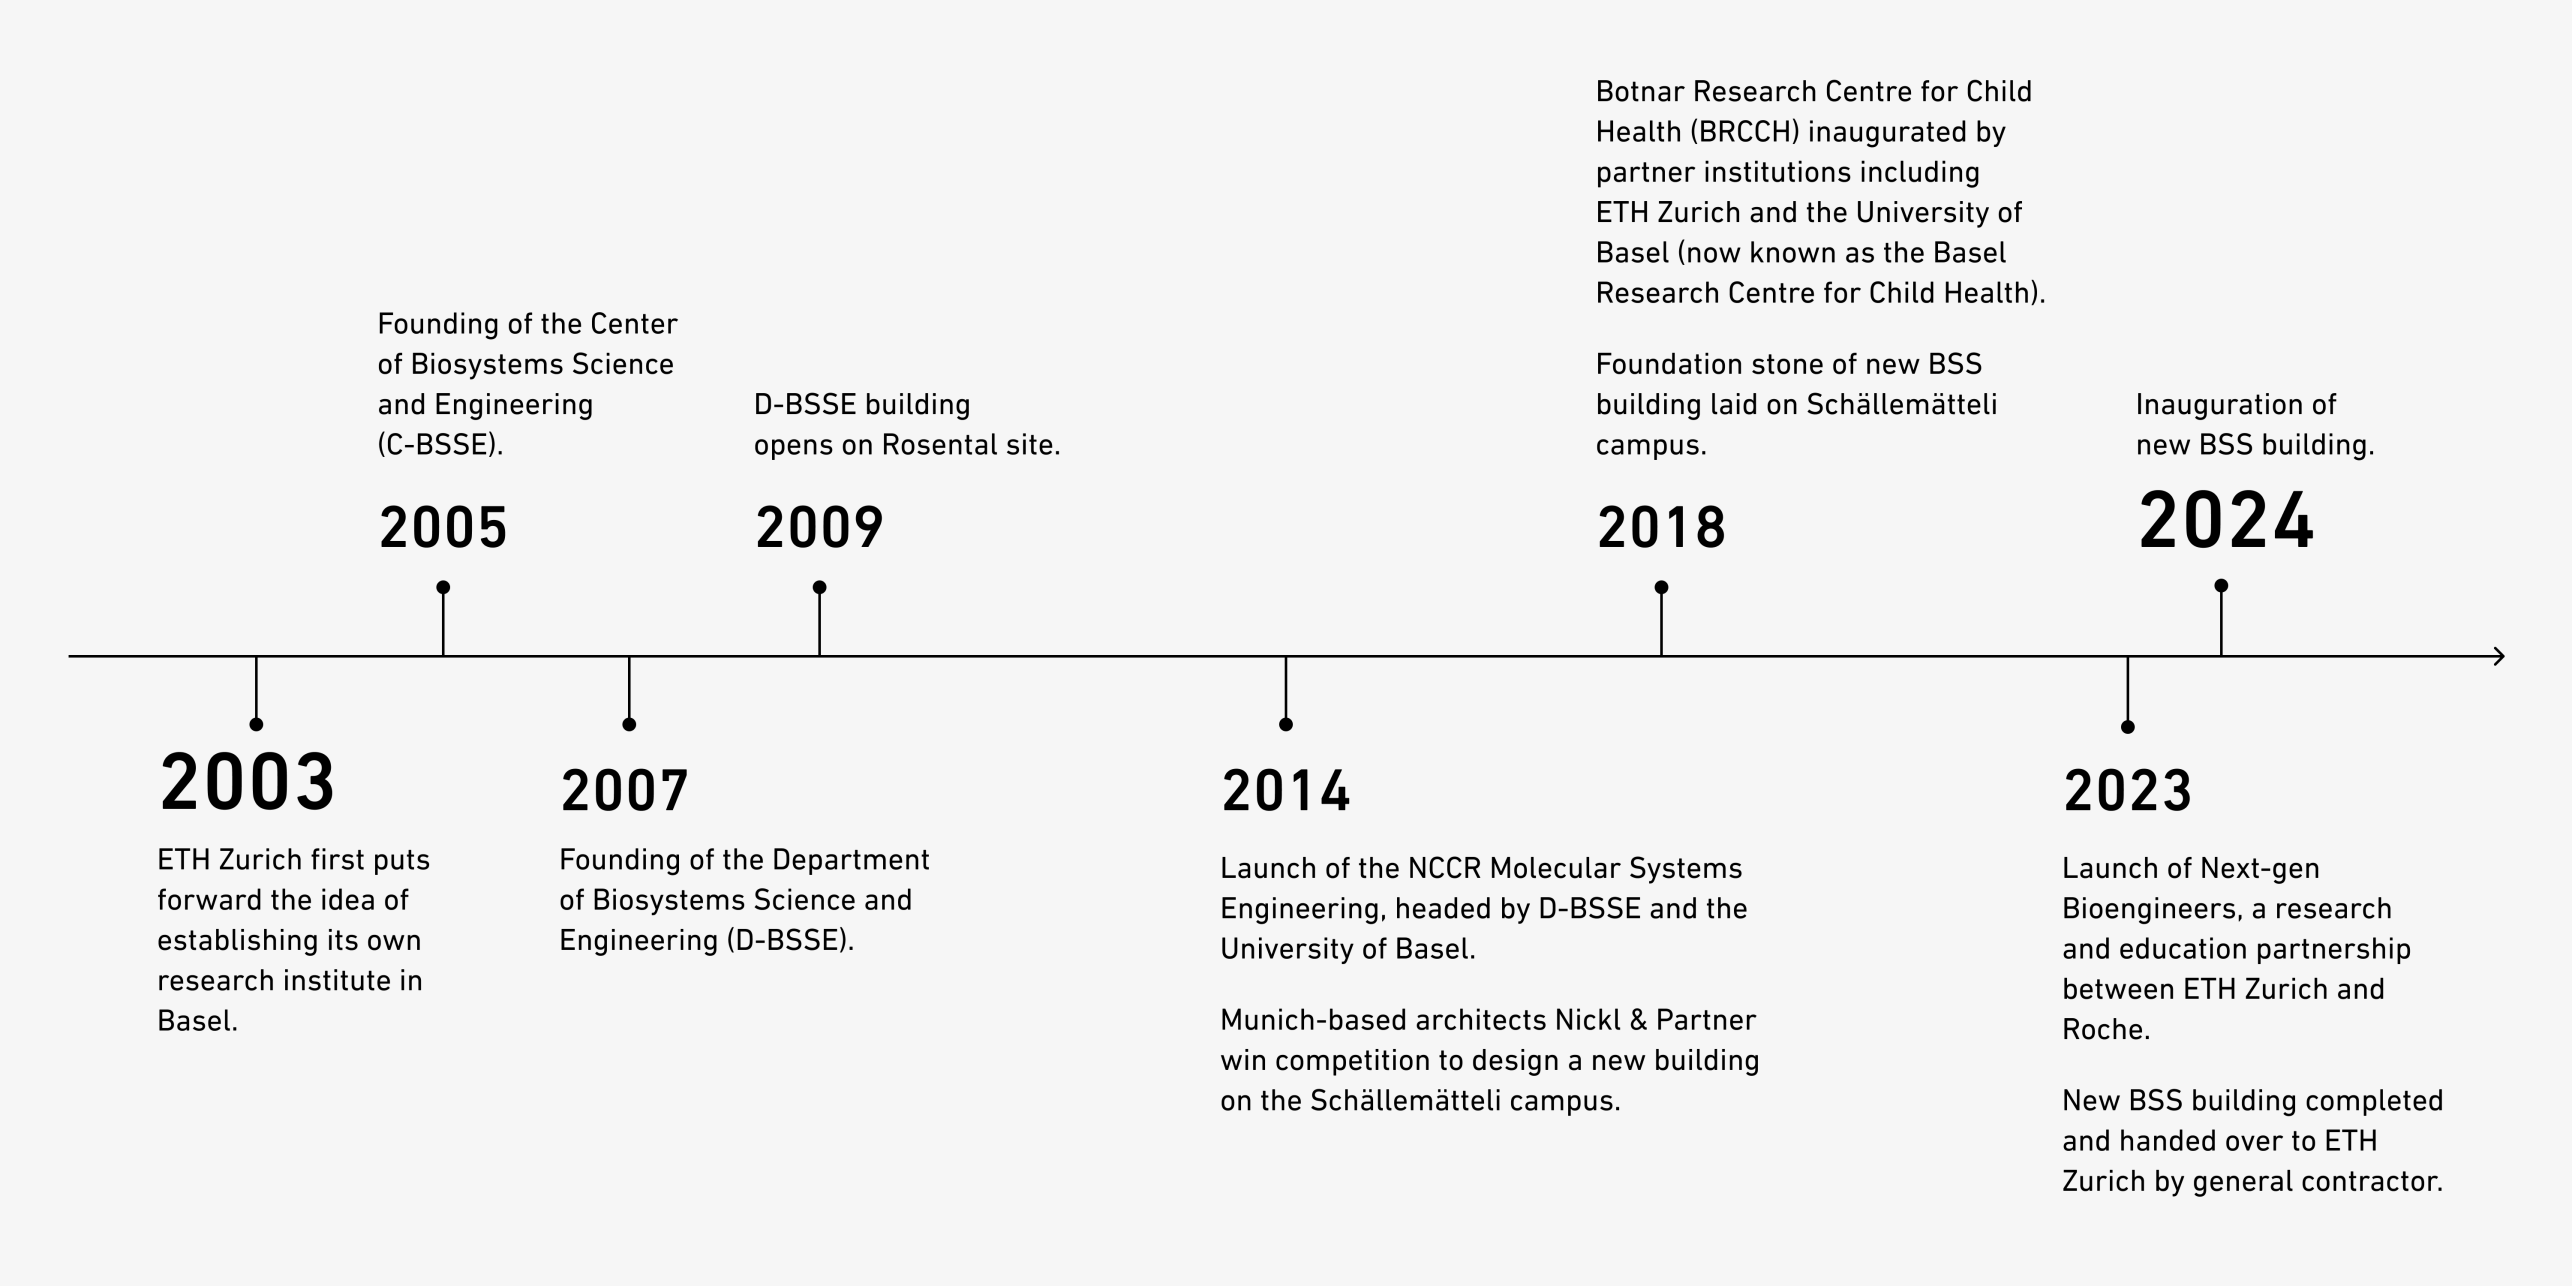 Enlarged view: Zeitstrahlt - timeline Department of Biosystems in Basel 